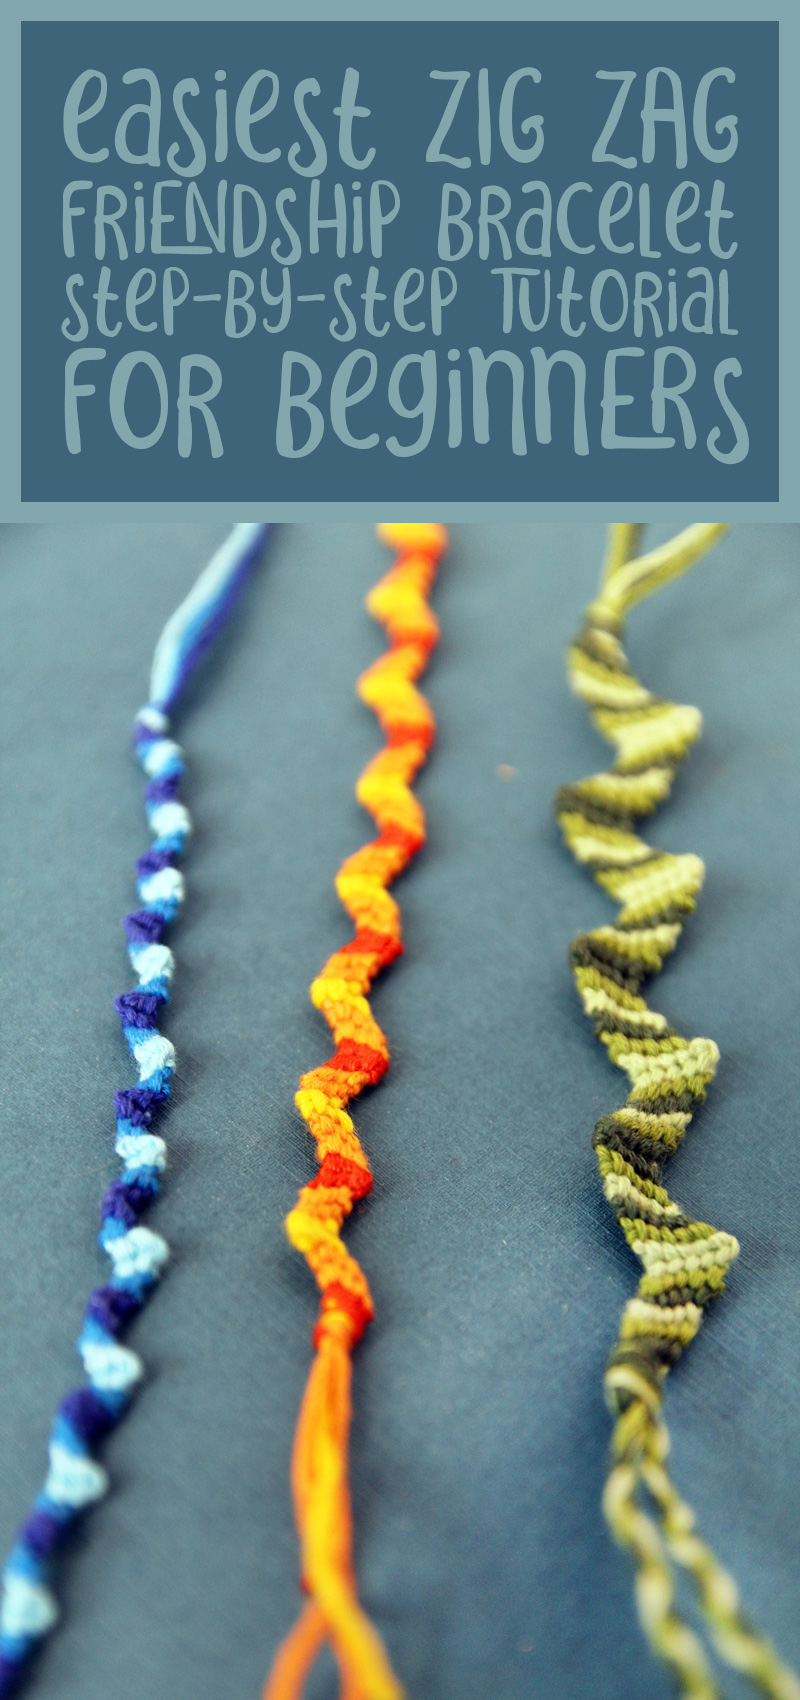 learn how to make an easy friendship bracelet for beginners in the classic zig zag style!